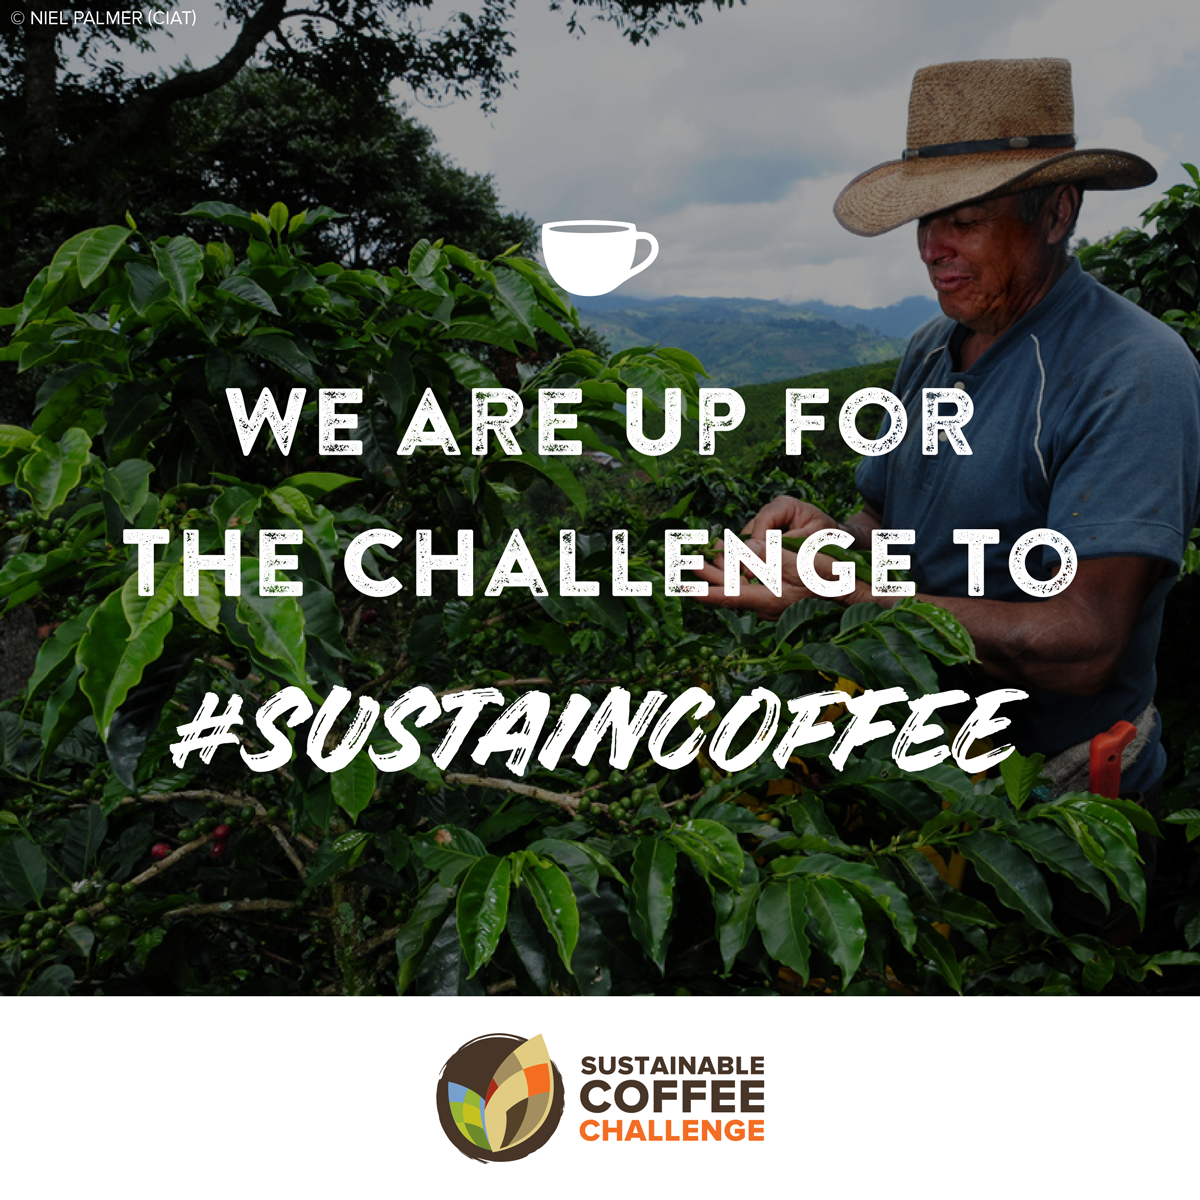 Coffee farmer: We are up for the challenge to #sustaincoffee